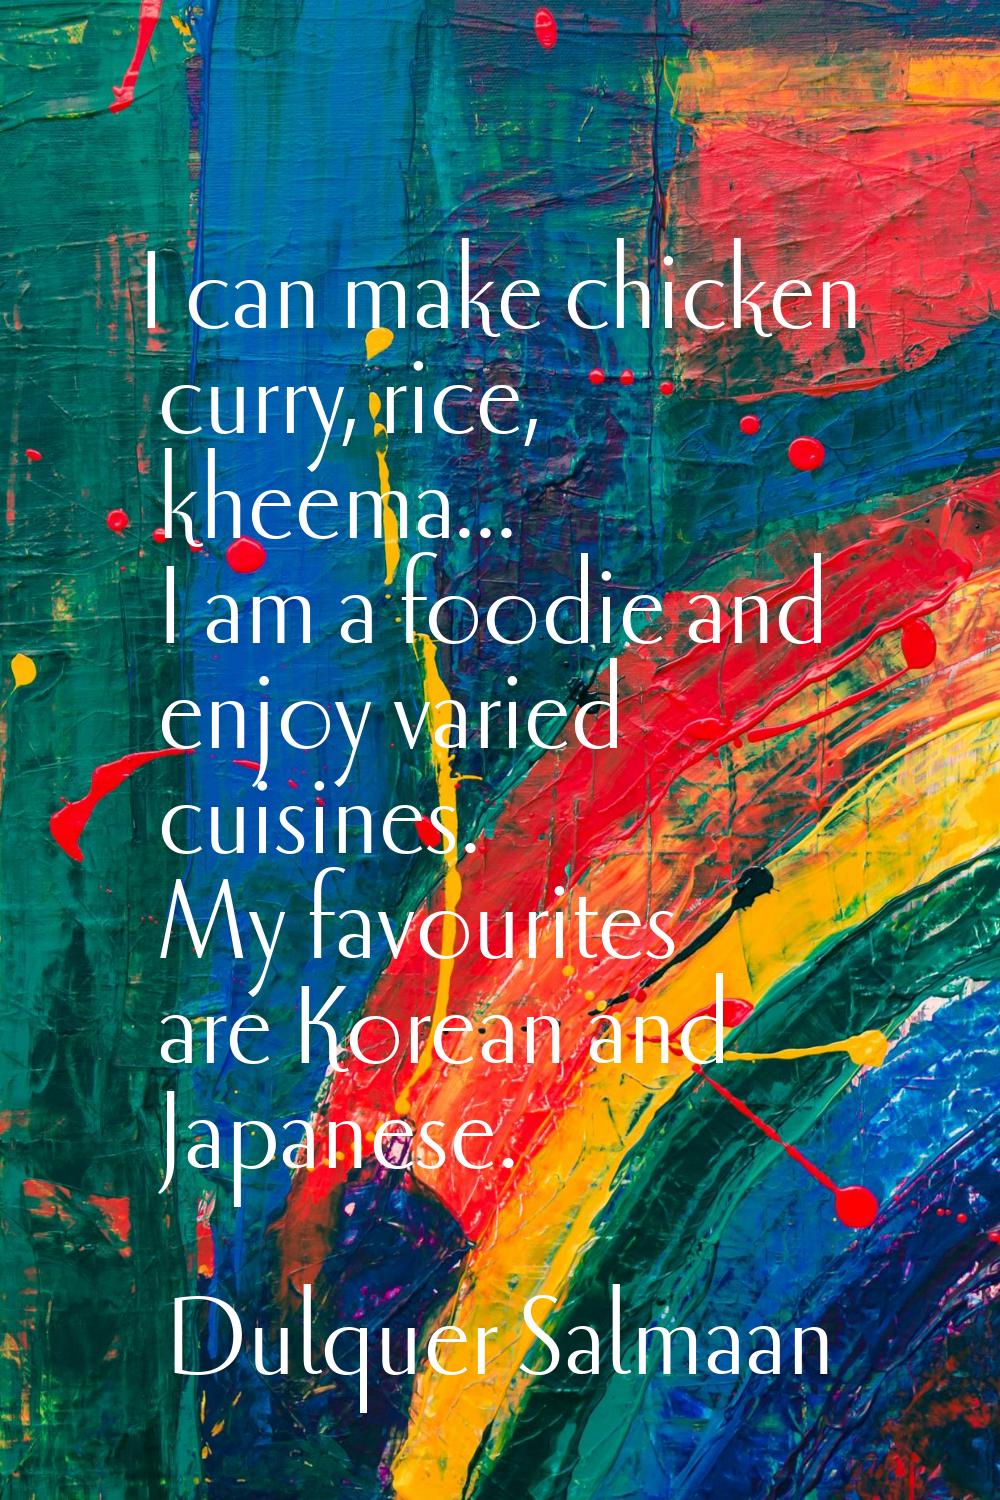 I can make chicken curry, rice, kheema... I am a foodie and enjoy varied cuisines. My favourites ar